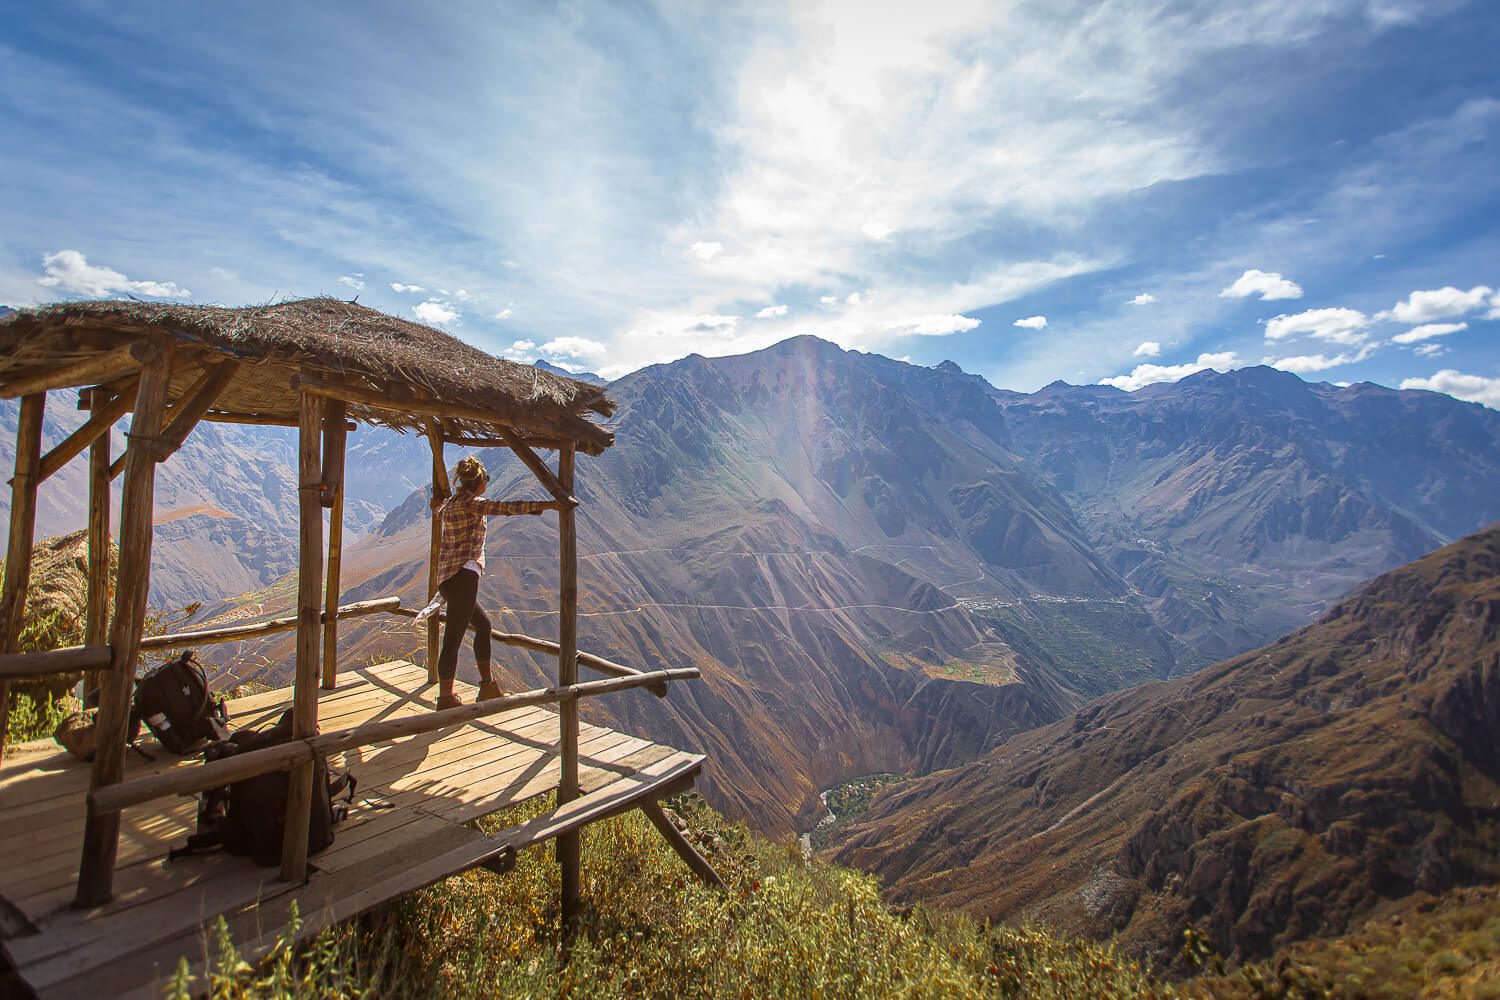 How to get to Colca Canyon